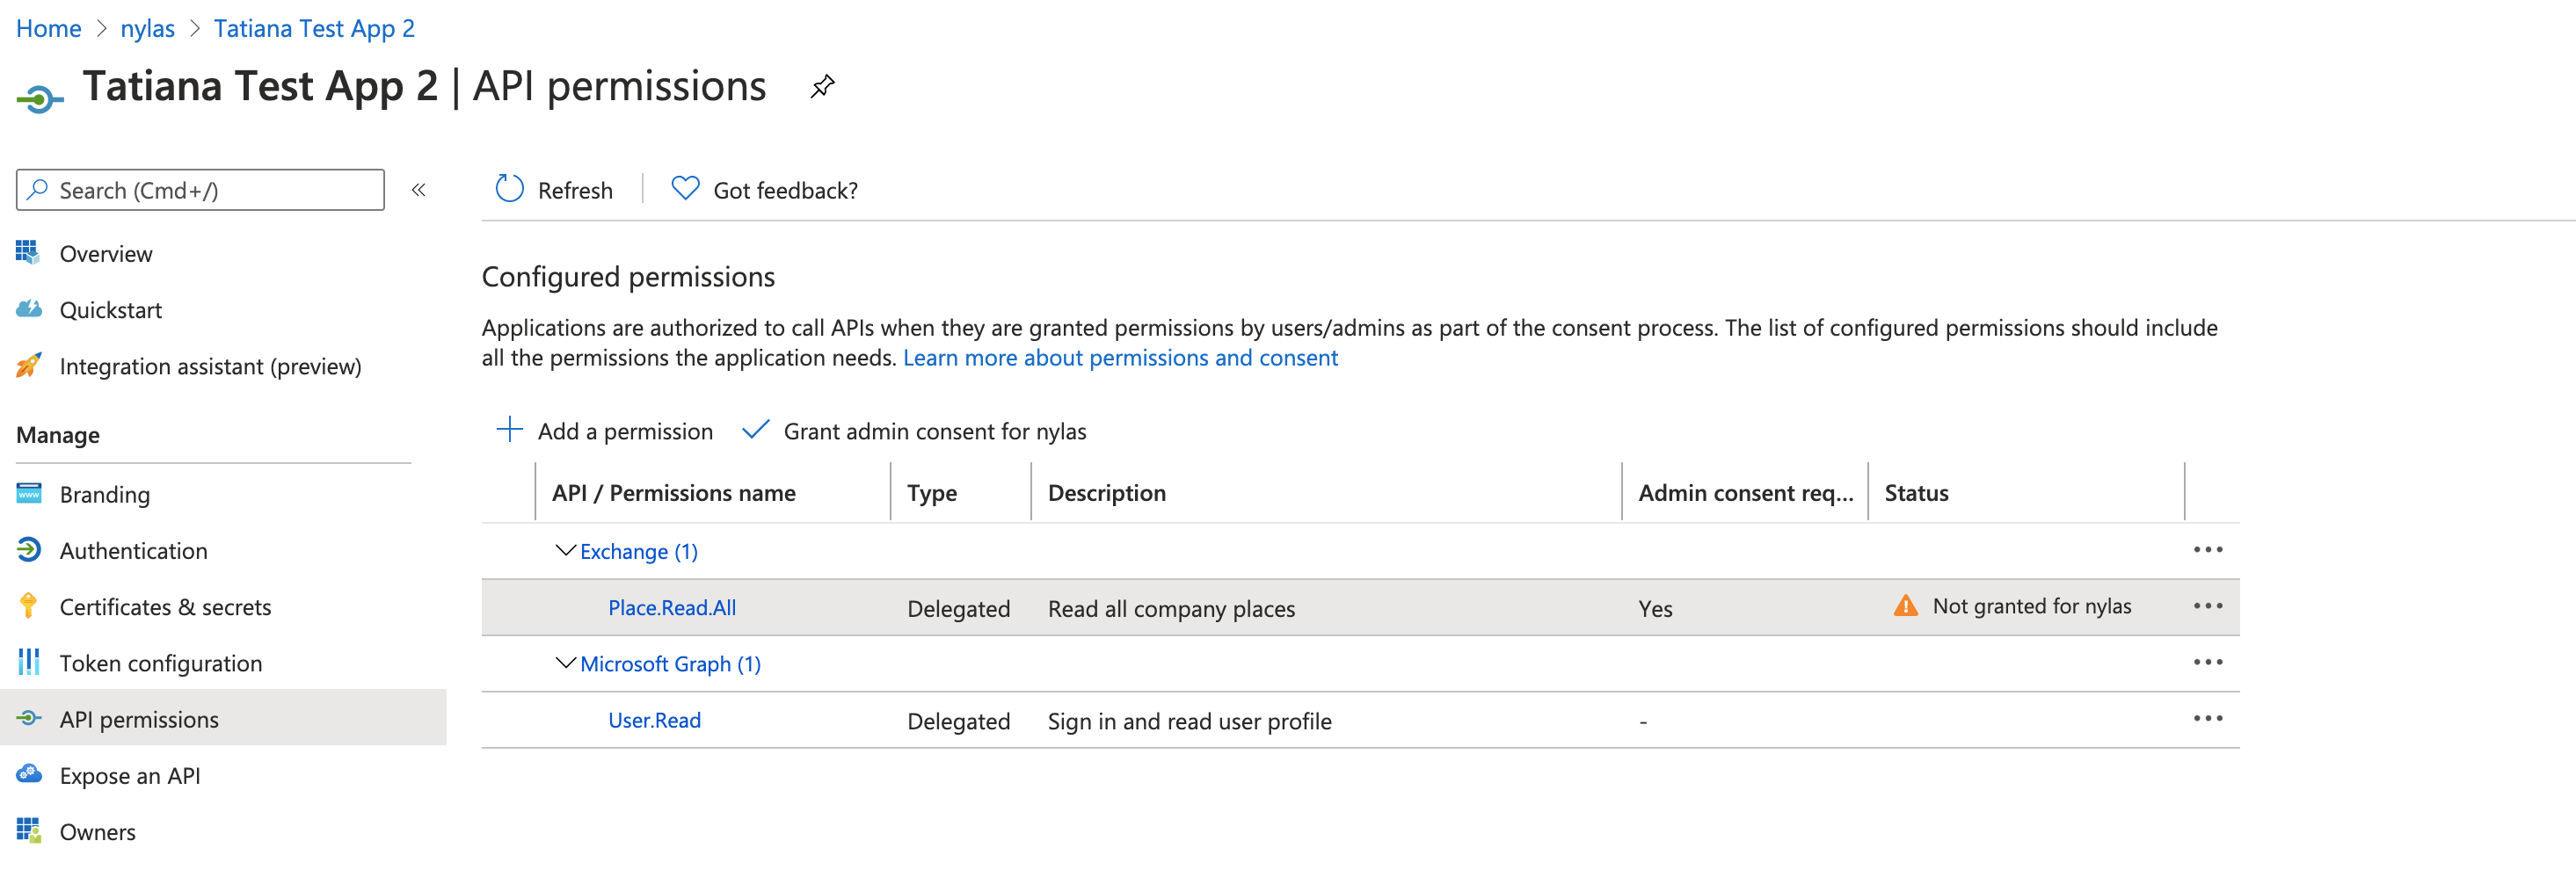 The Microsoft Azure Active Directory Admin Center showing the "API permissions" page for an enterprise application. The "Place.Read.All" permission is highlighted, and its status shows the permission is not granted for the application.